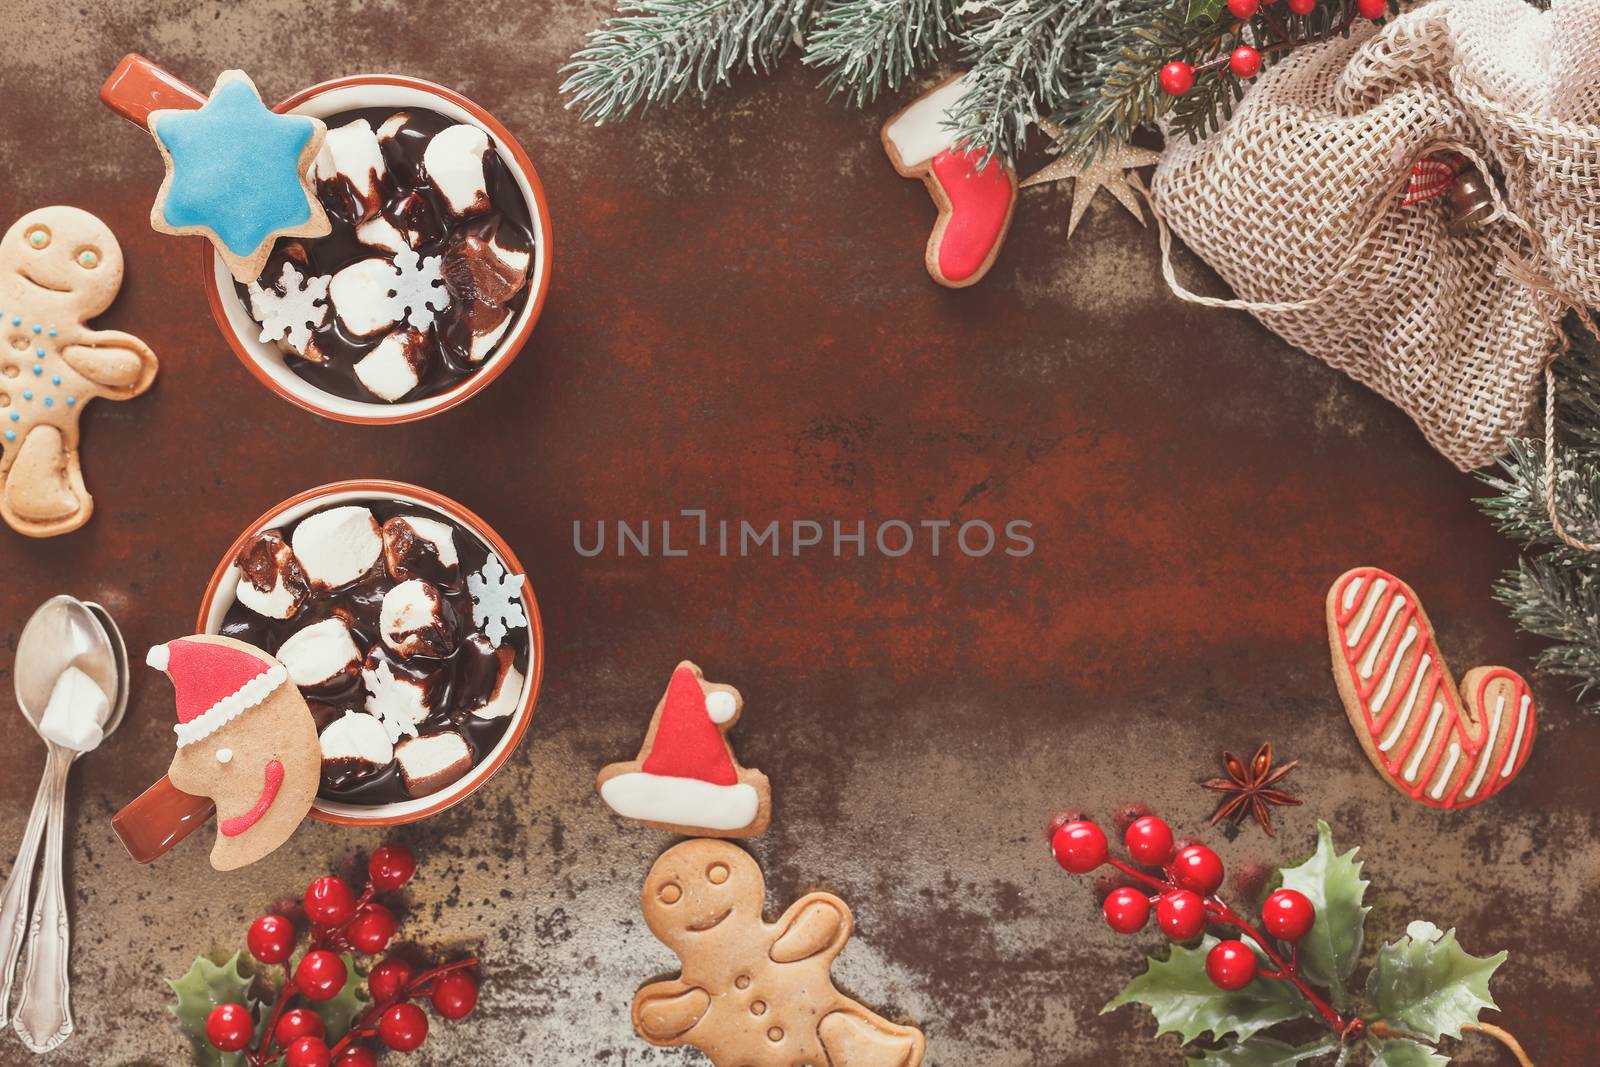 Hot chocolate in a Christmas setting by Slast20